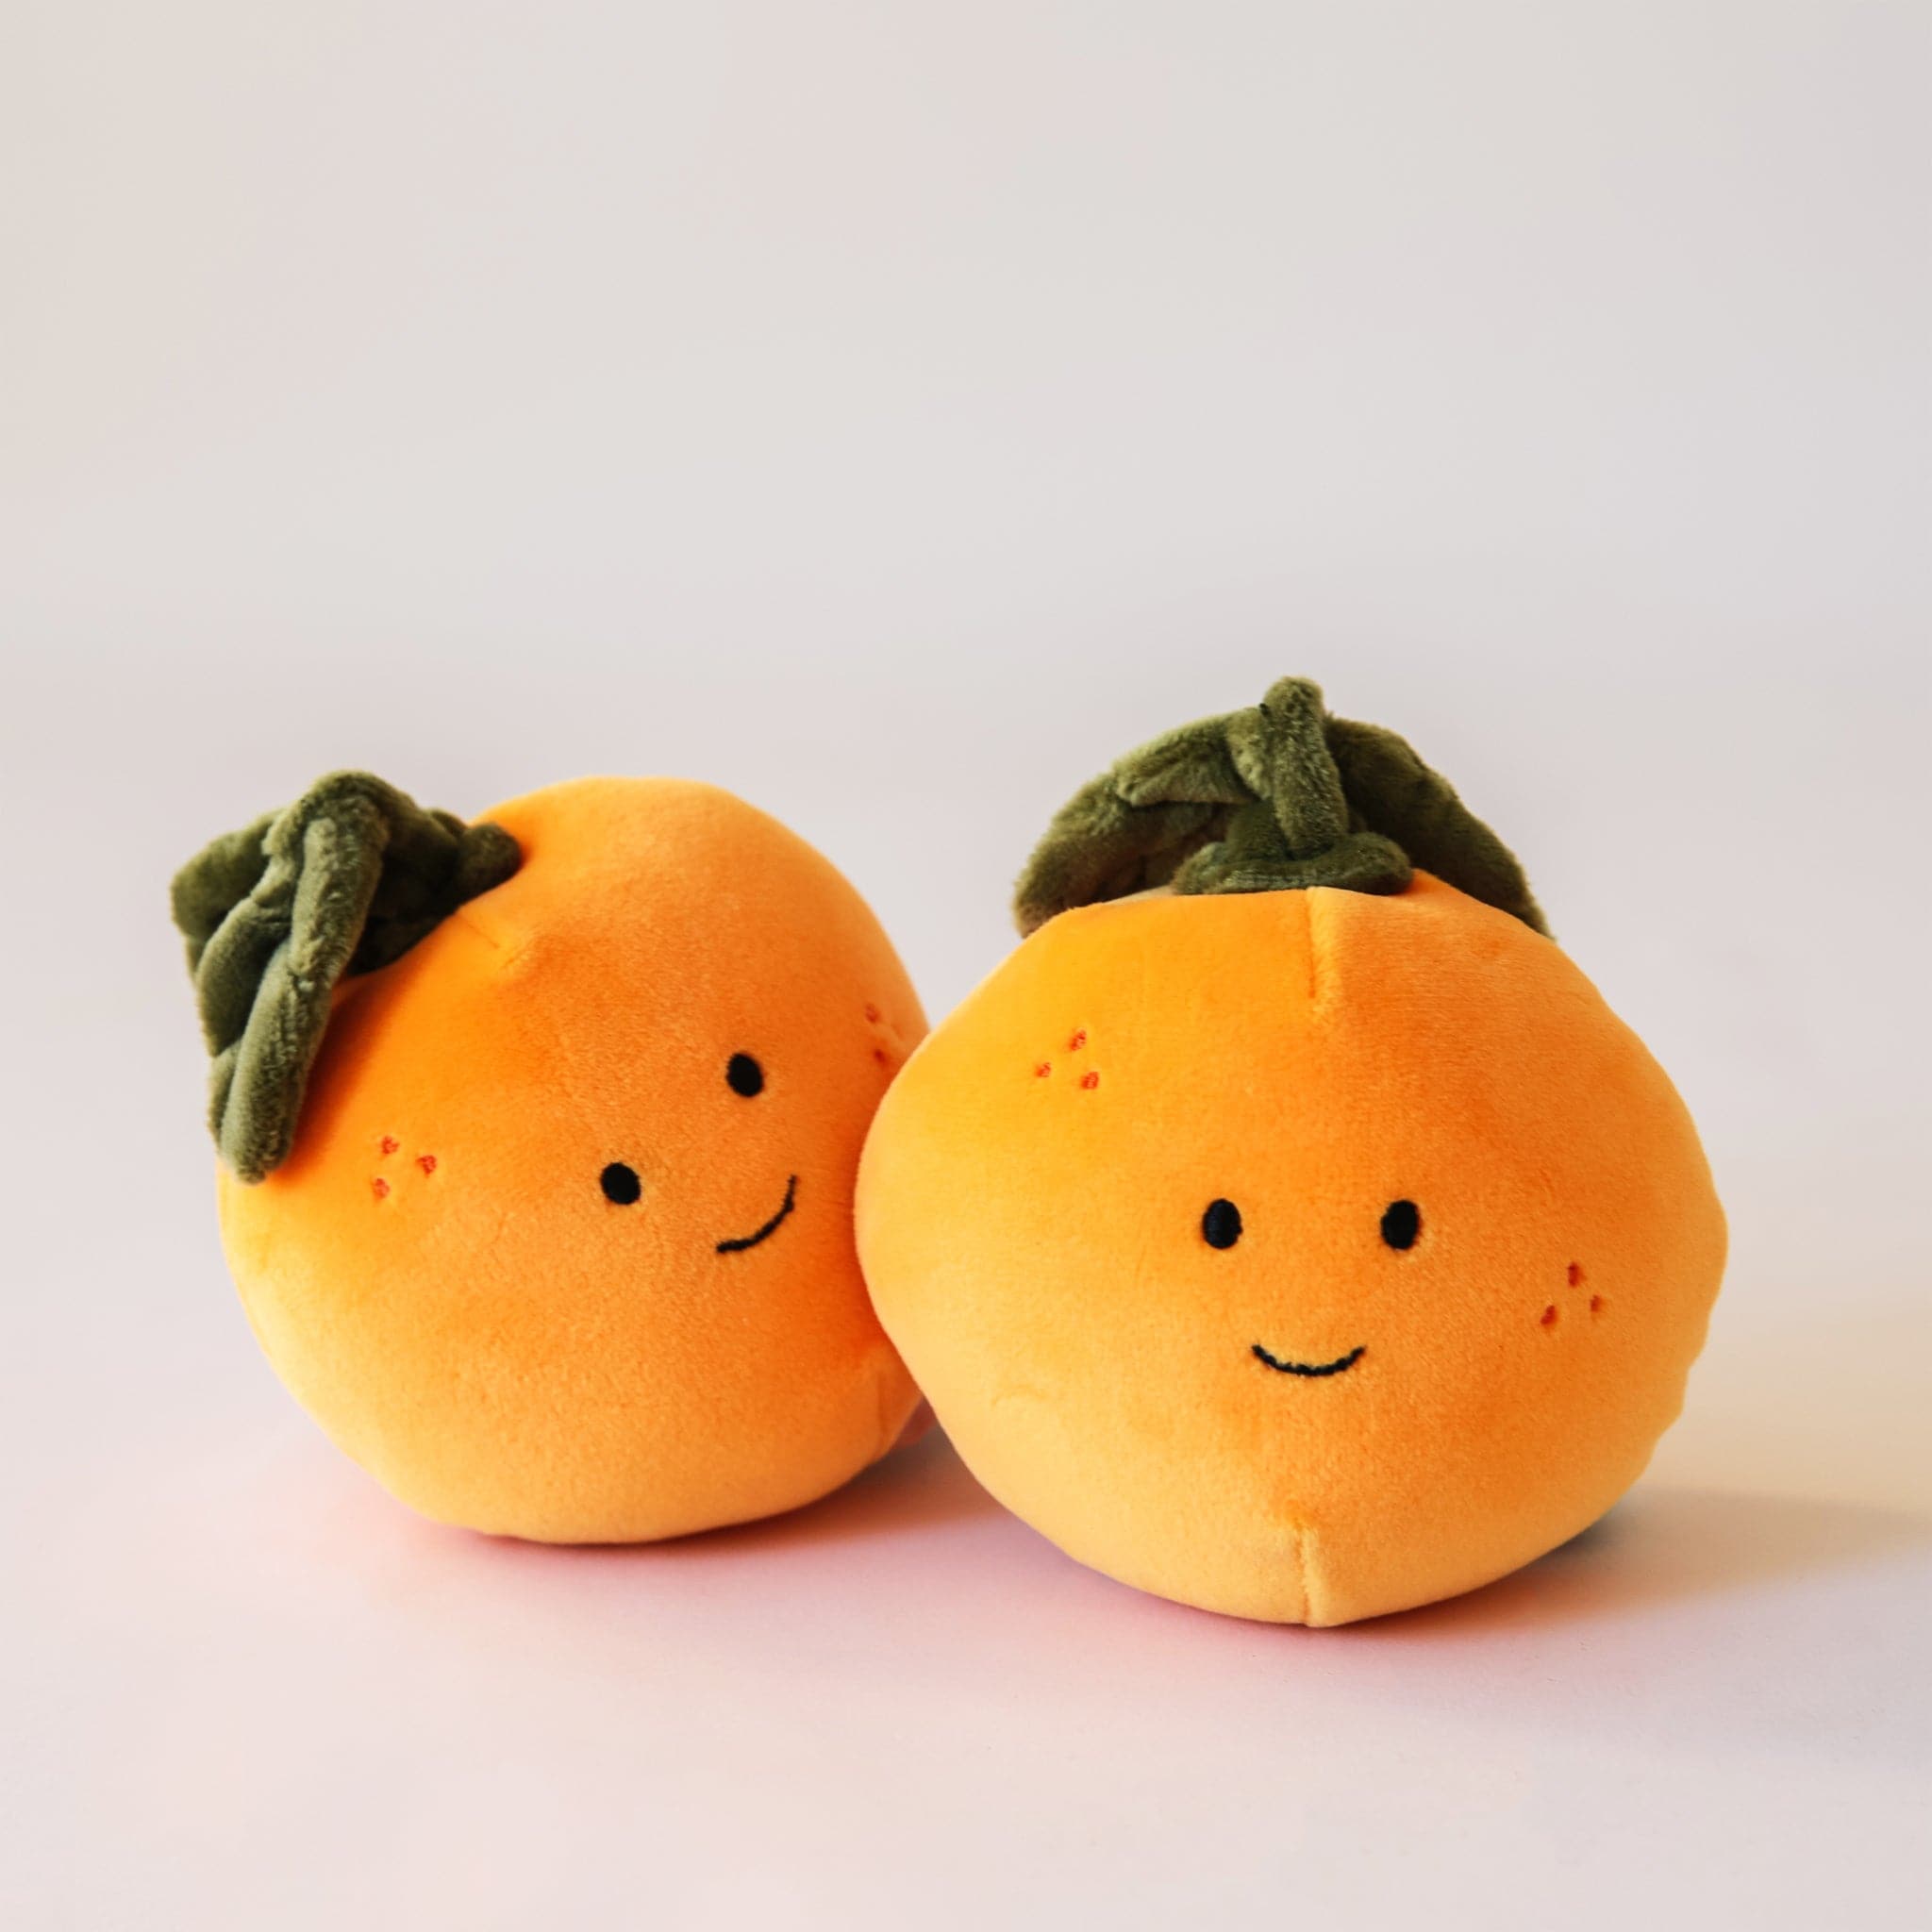 Adorable, plush oranges with sweet smiles and speckled cheeks. With floppy green leaves, these oranges are the absolute cutest. Their fur is soft and their leaves are floppy.